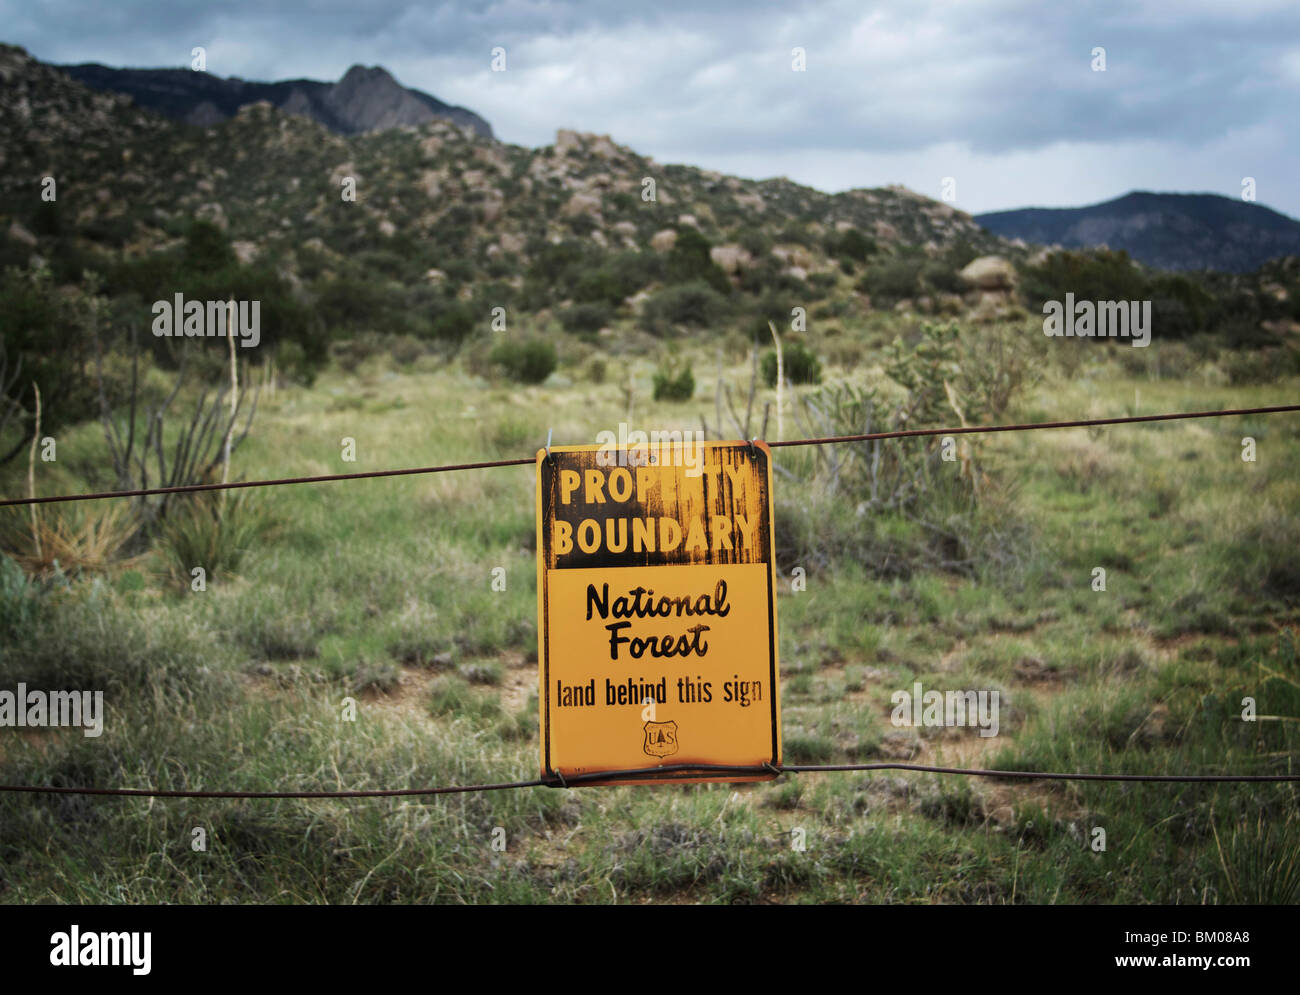 Fence sign marks boundary between public land and national forest elena gallegos park open space of sandia mountains albuquerque Stock Photo